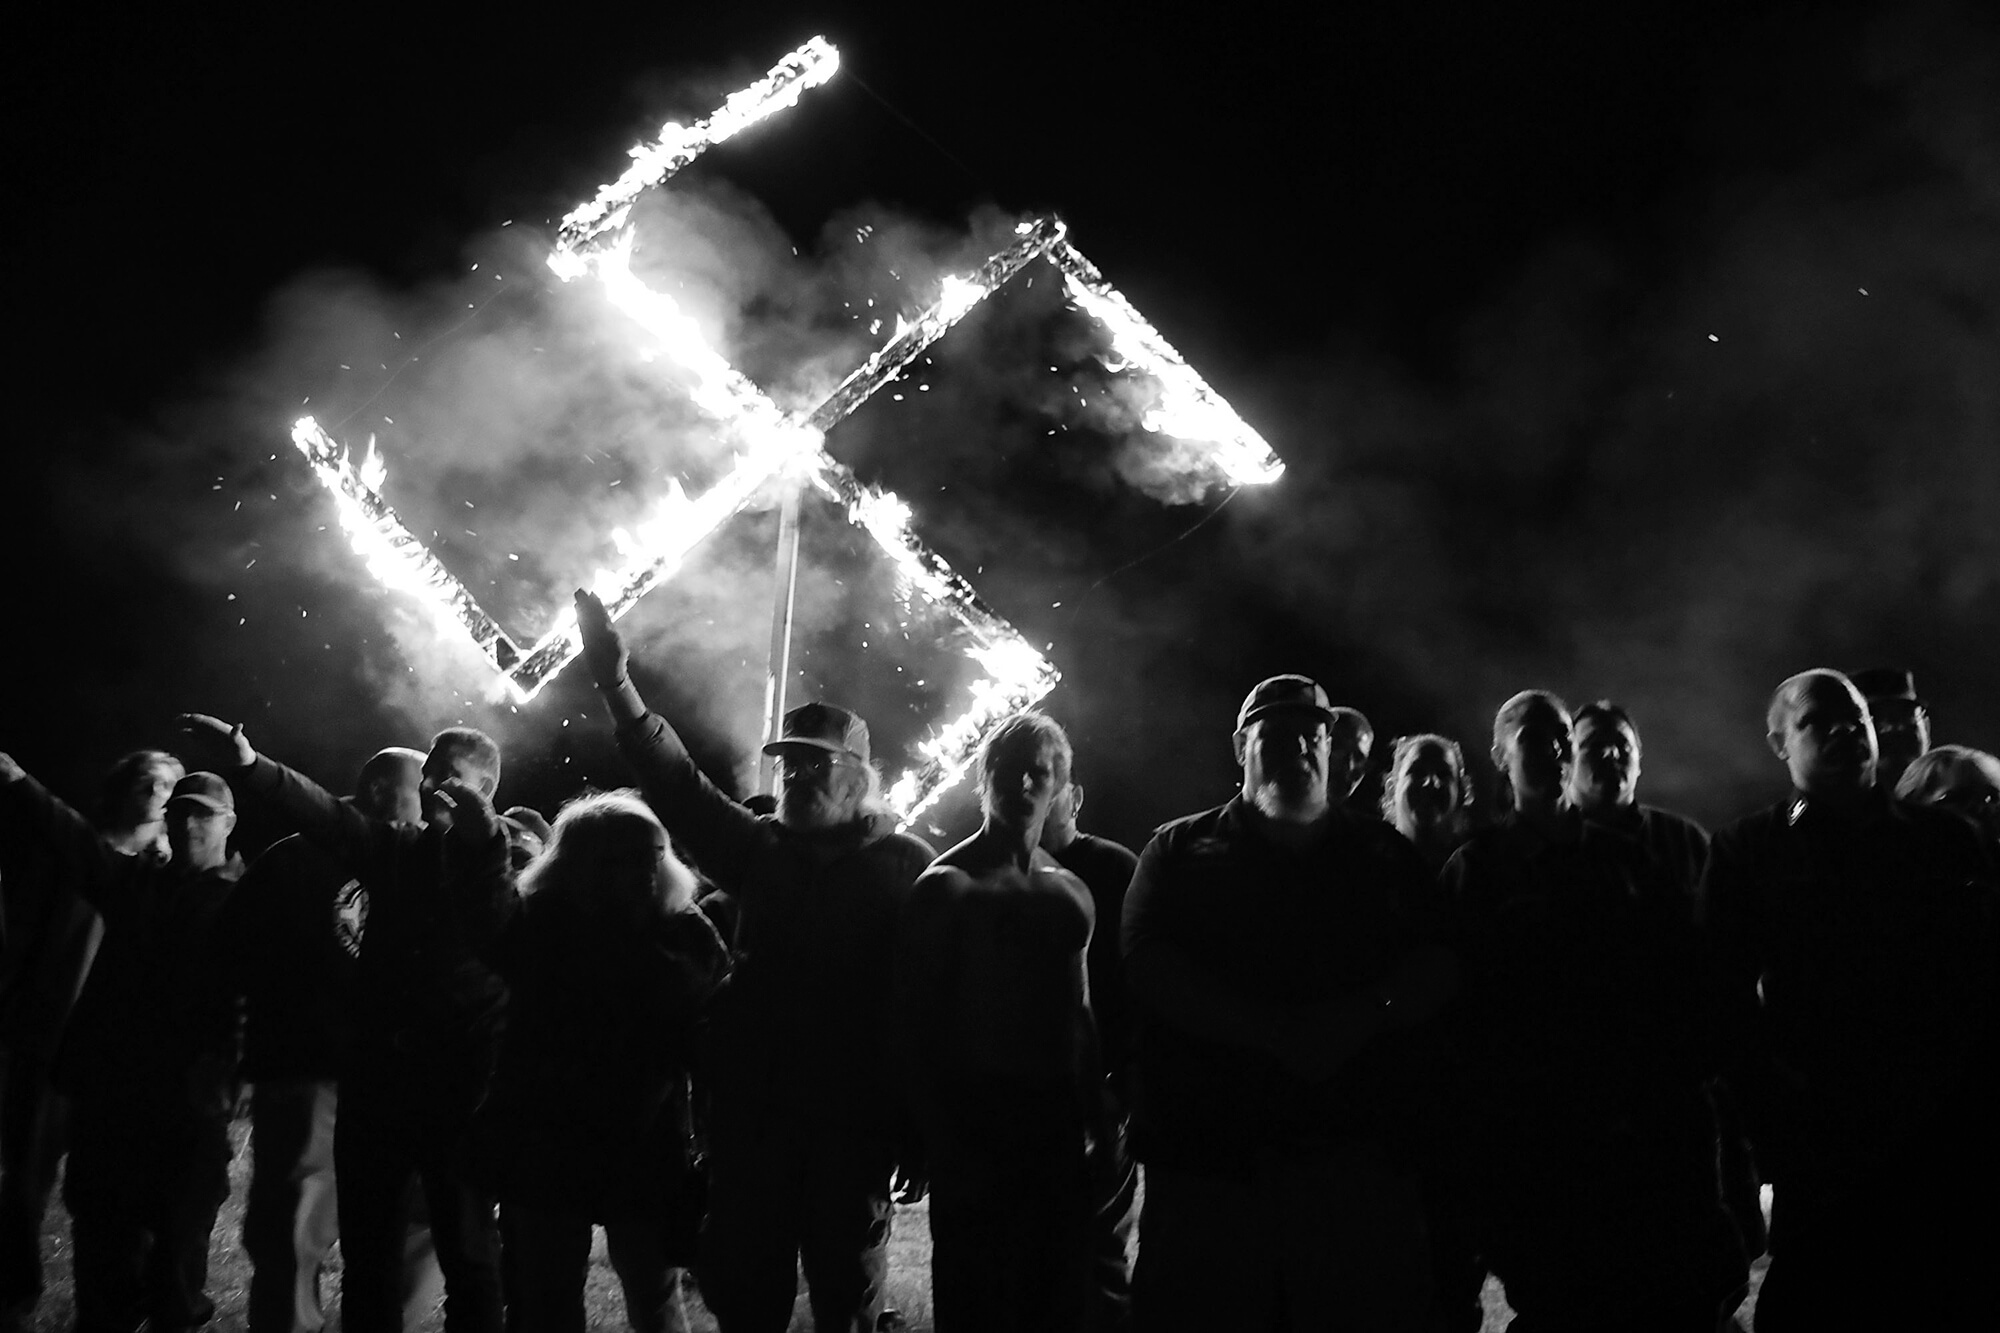 Members of the National Socialist Movement, one of the largest neo-Nazi groups in the US, hold a swastika burning after a rally in April 2018 in Draketown, Ga. From the White House, Donald Trump ignored the danger of white supremacist groups, and equivocated on the threat they posed to American values and the homeland.Trump later went on to foment an insurrection and attempted coup with the support of white supremacist groups.